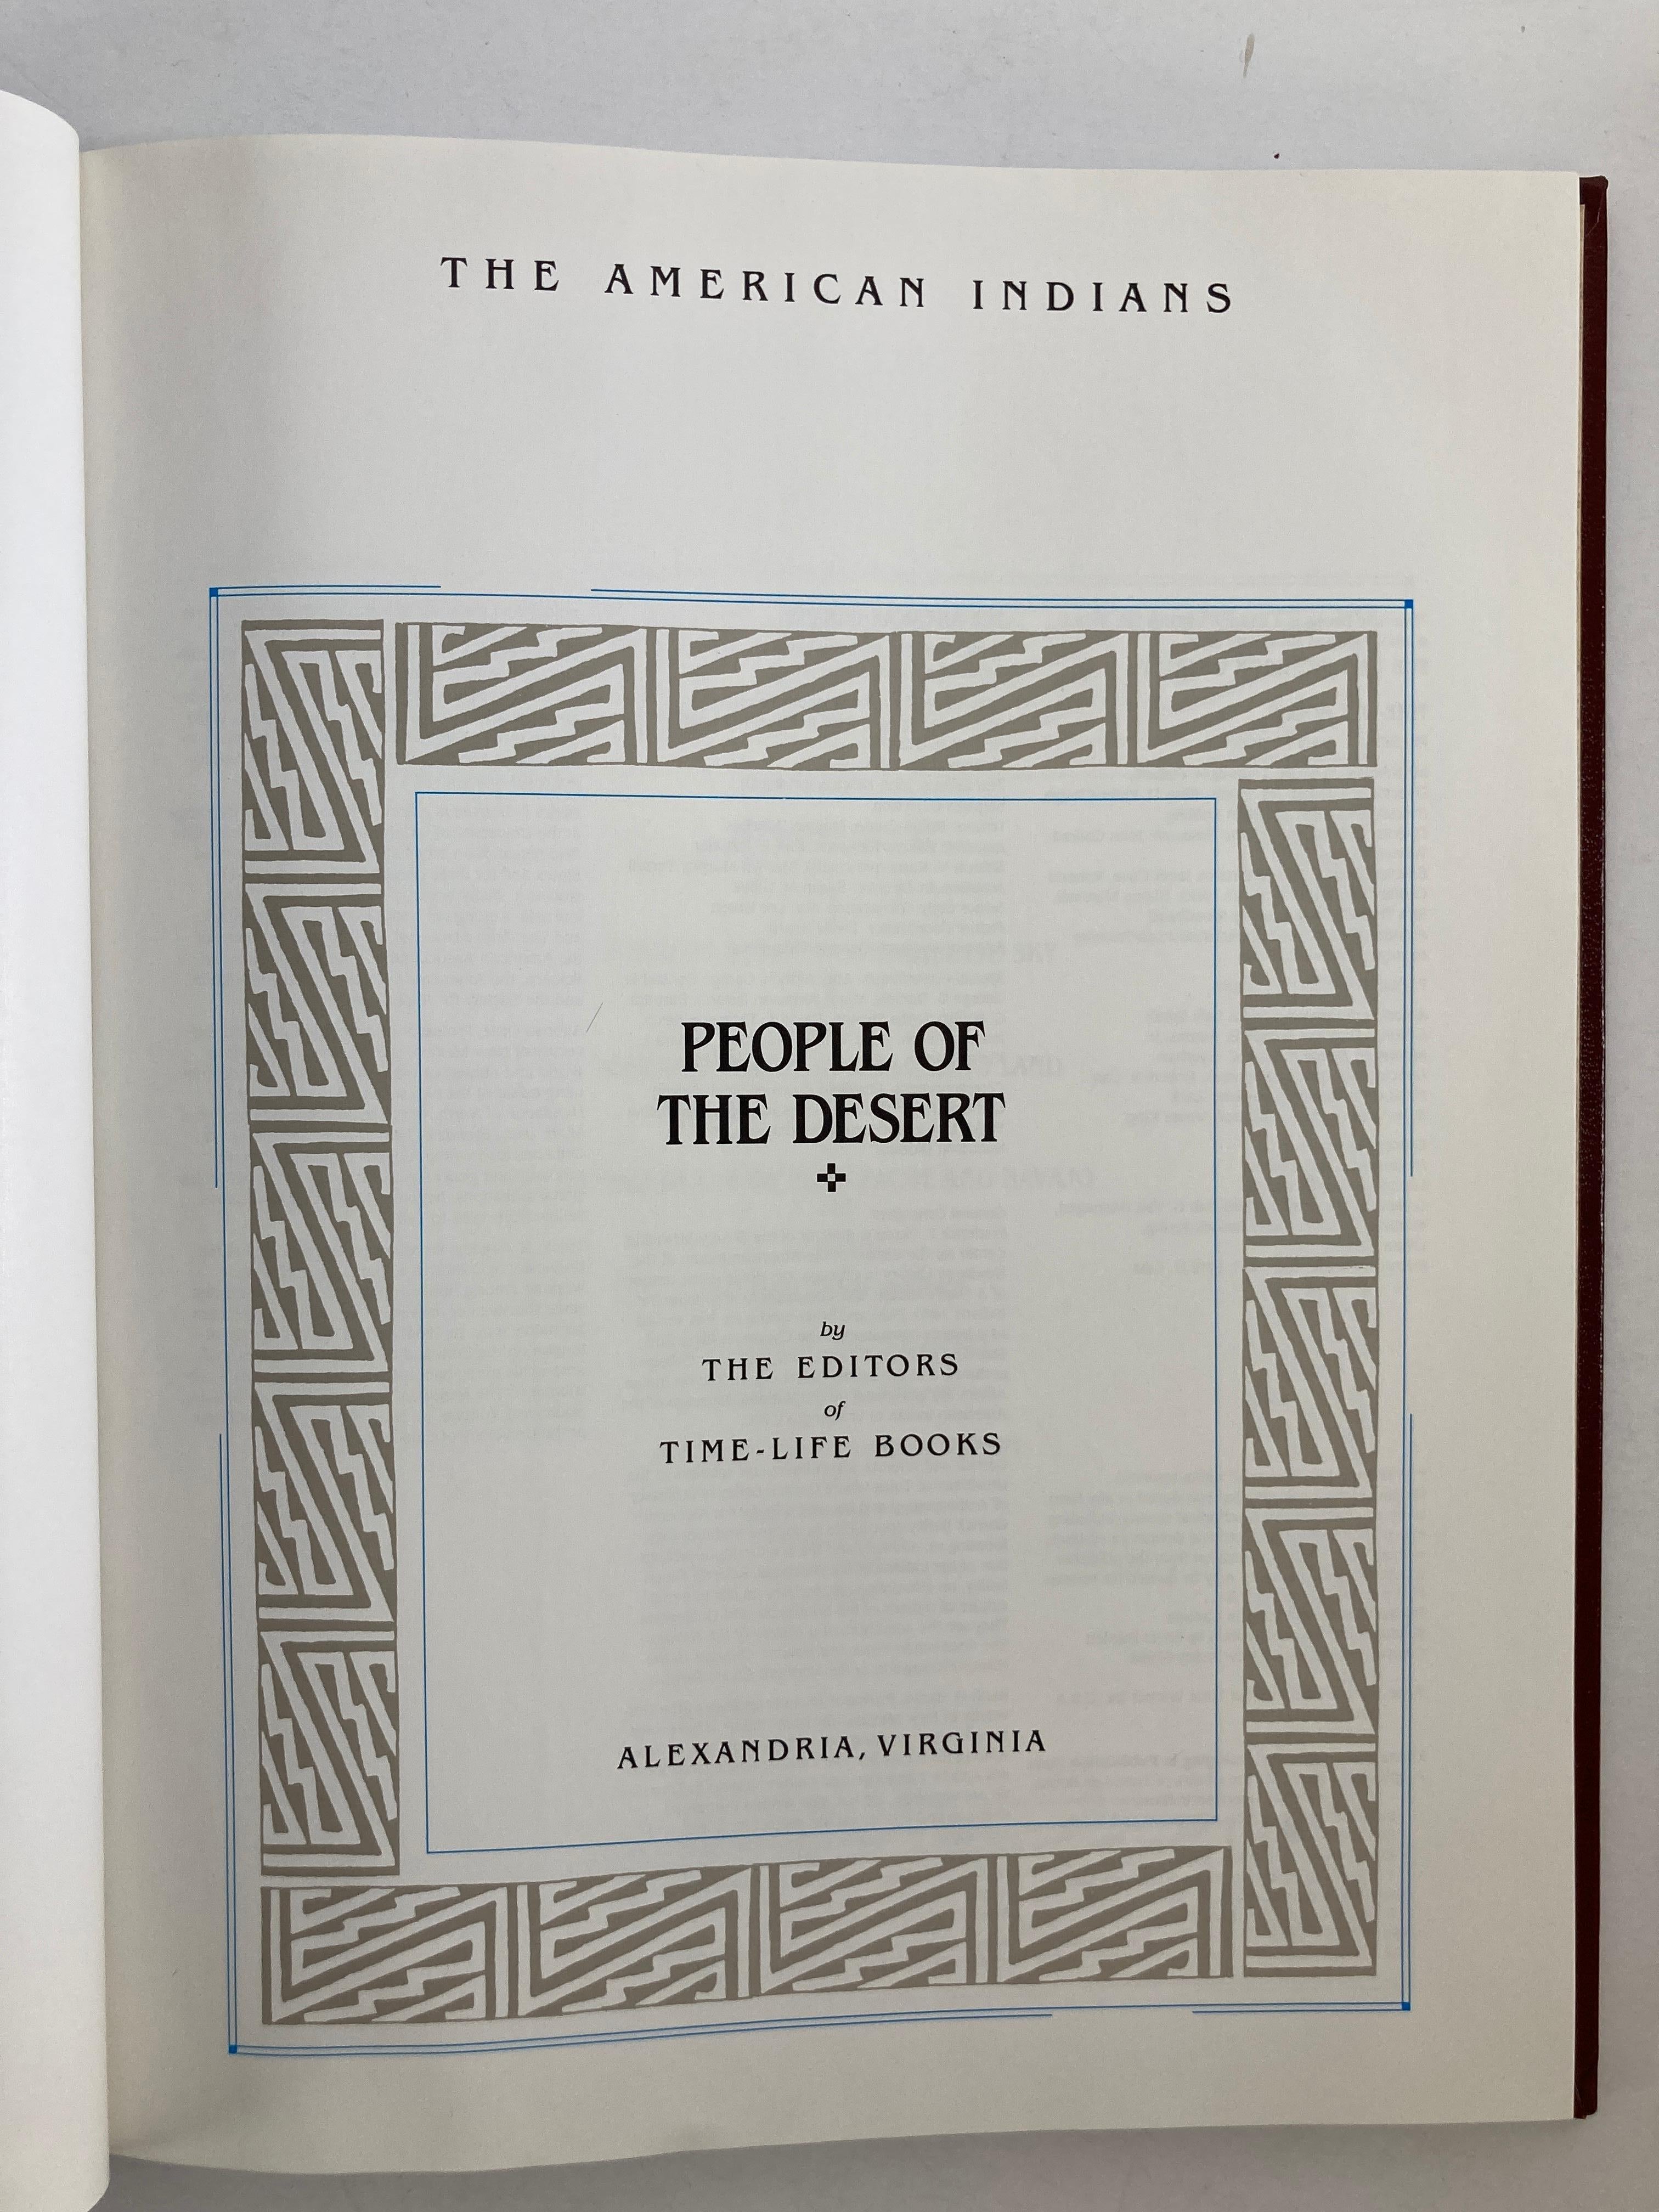 The American Indians, The Way of the Warriors and People of the Desert Books 10